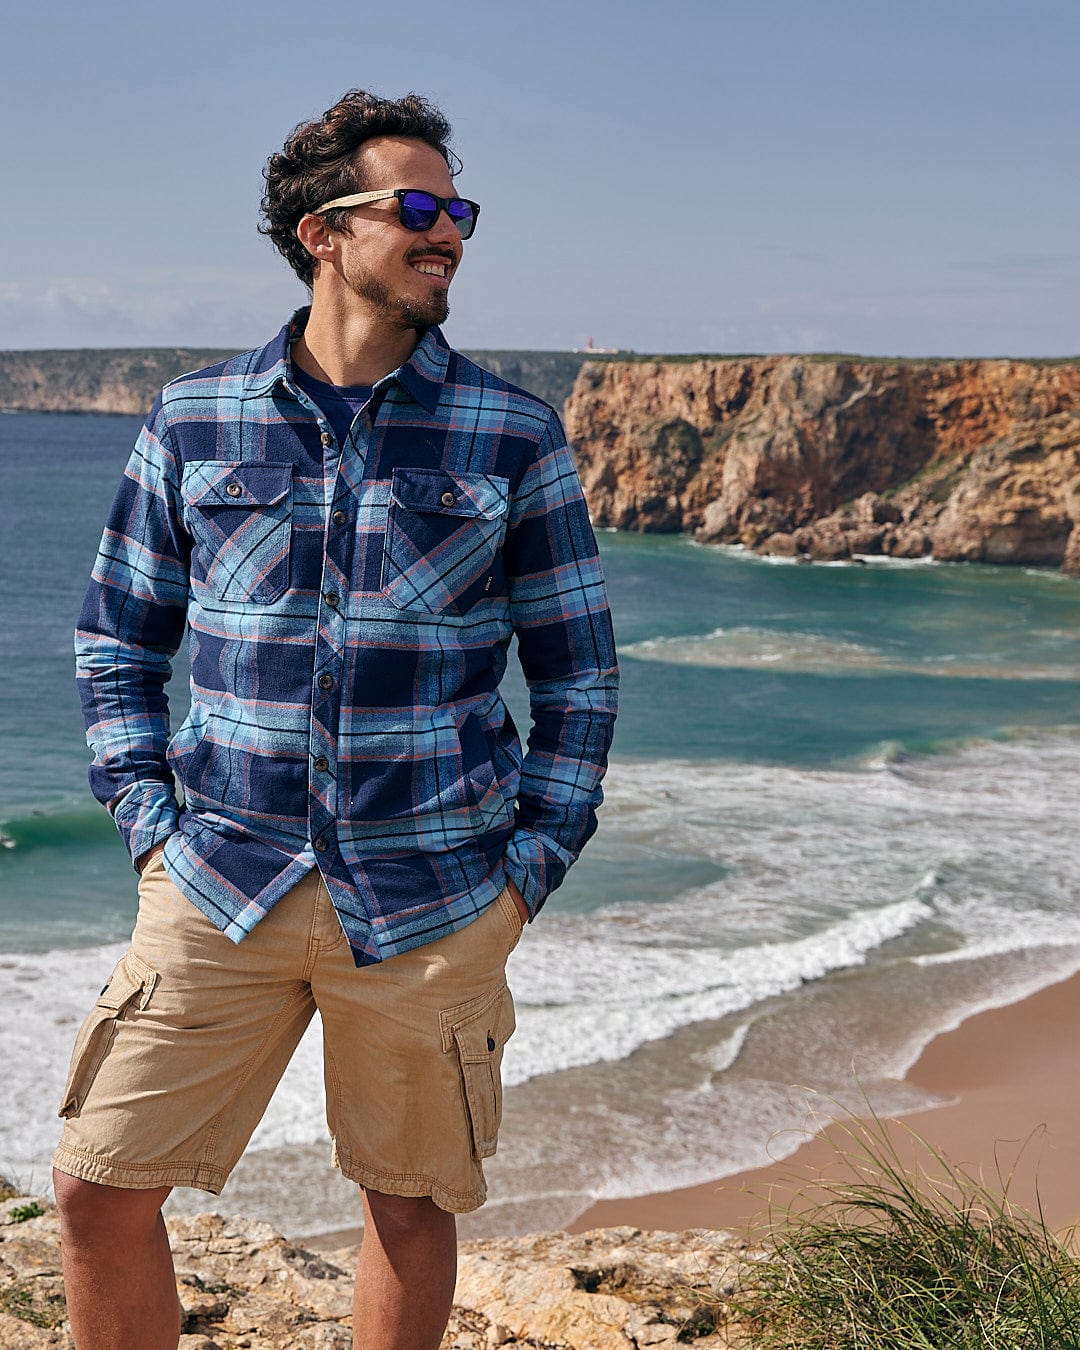 A man in a Saltrock Ocean - Mens Borg Lined Shirt - Blue Check is standing on a rocky beach, gazing at the ocean.